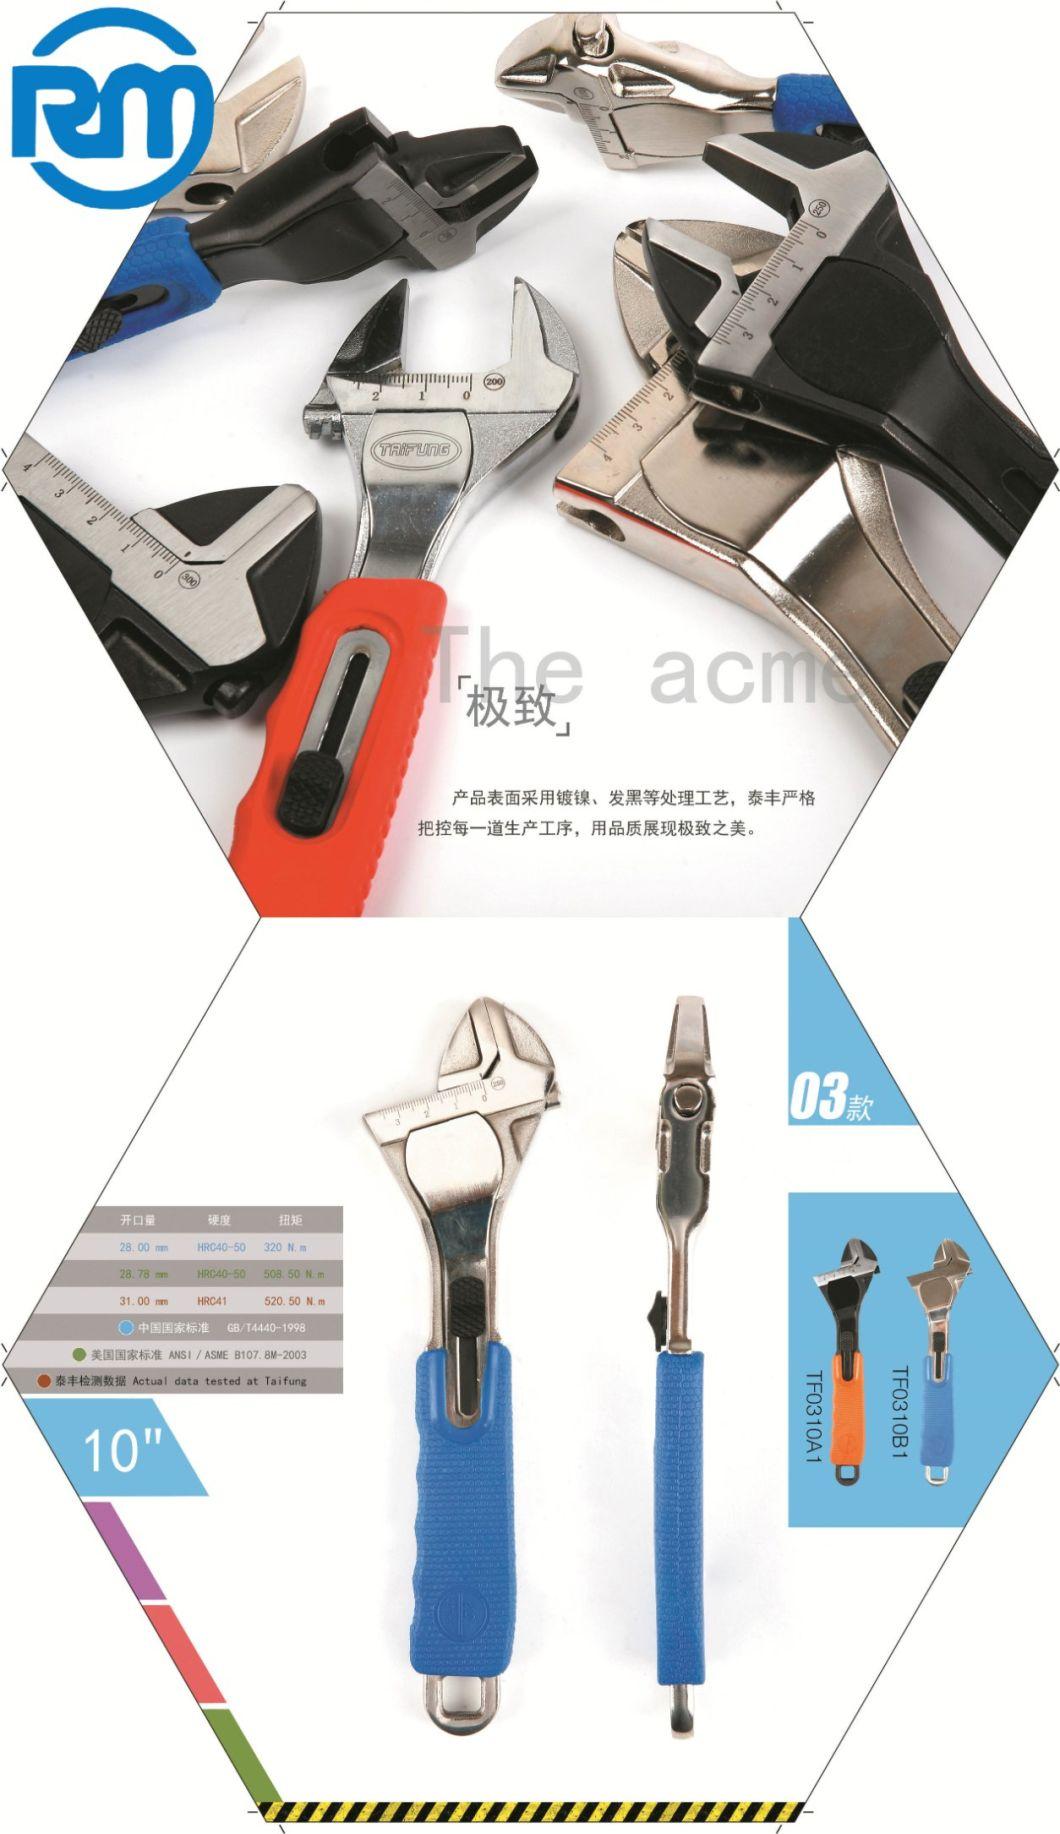 Flexible Ratchet Combination Wrench American ASME Standards Durable Sliding Adjusting Button Material Trr Strength